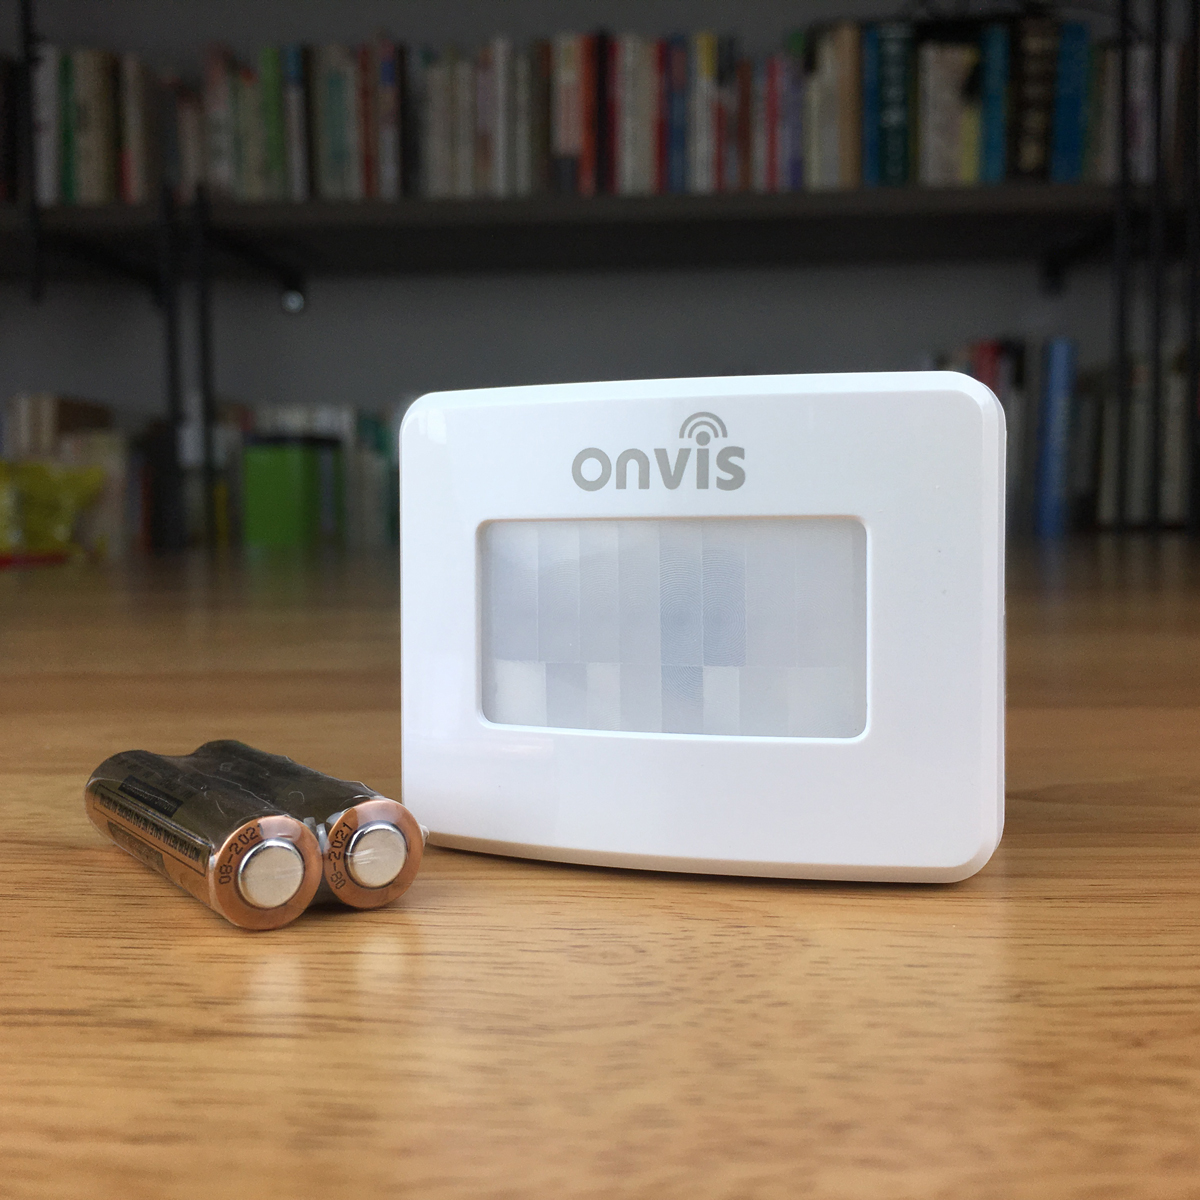 Onvis Smart Motion Sensor, Wireless Hygrometer, Thermometer, Works with  Apple HomeKit, Smart Home Automation, PIR Motion Detector-Thread